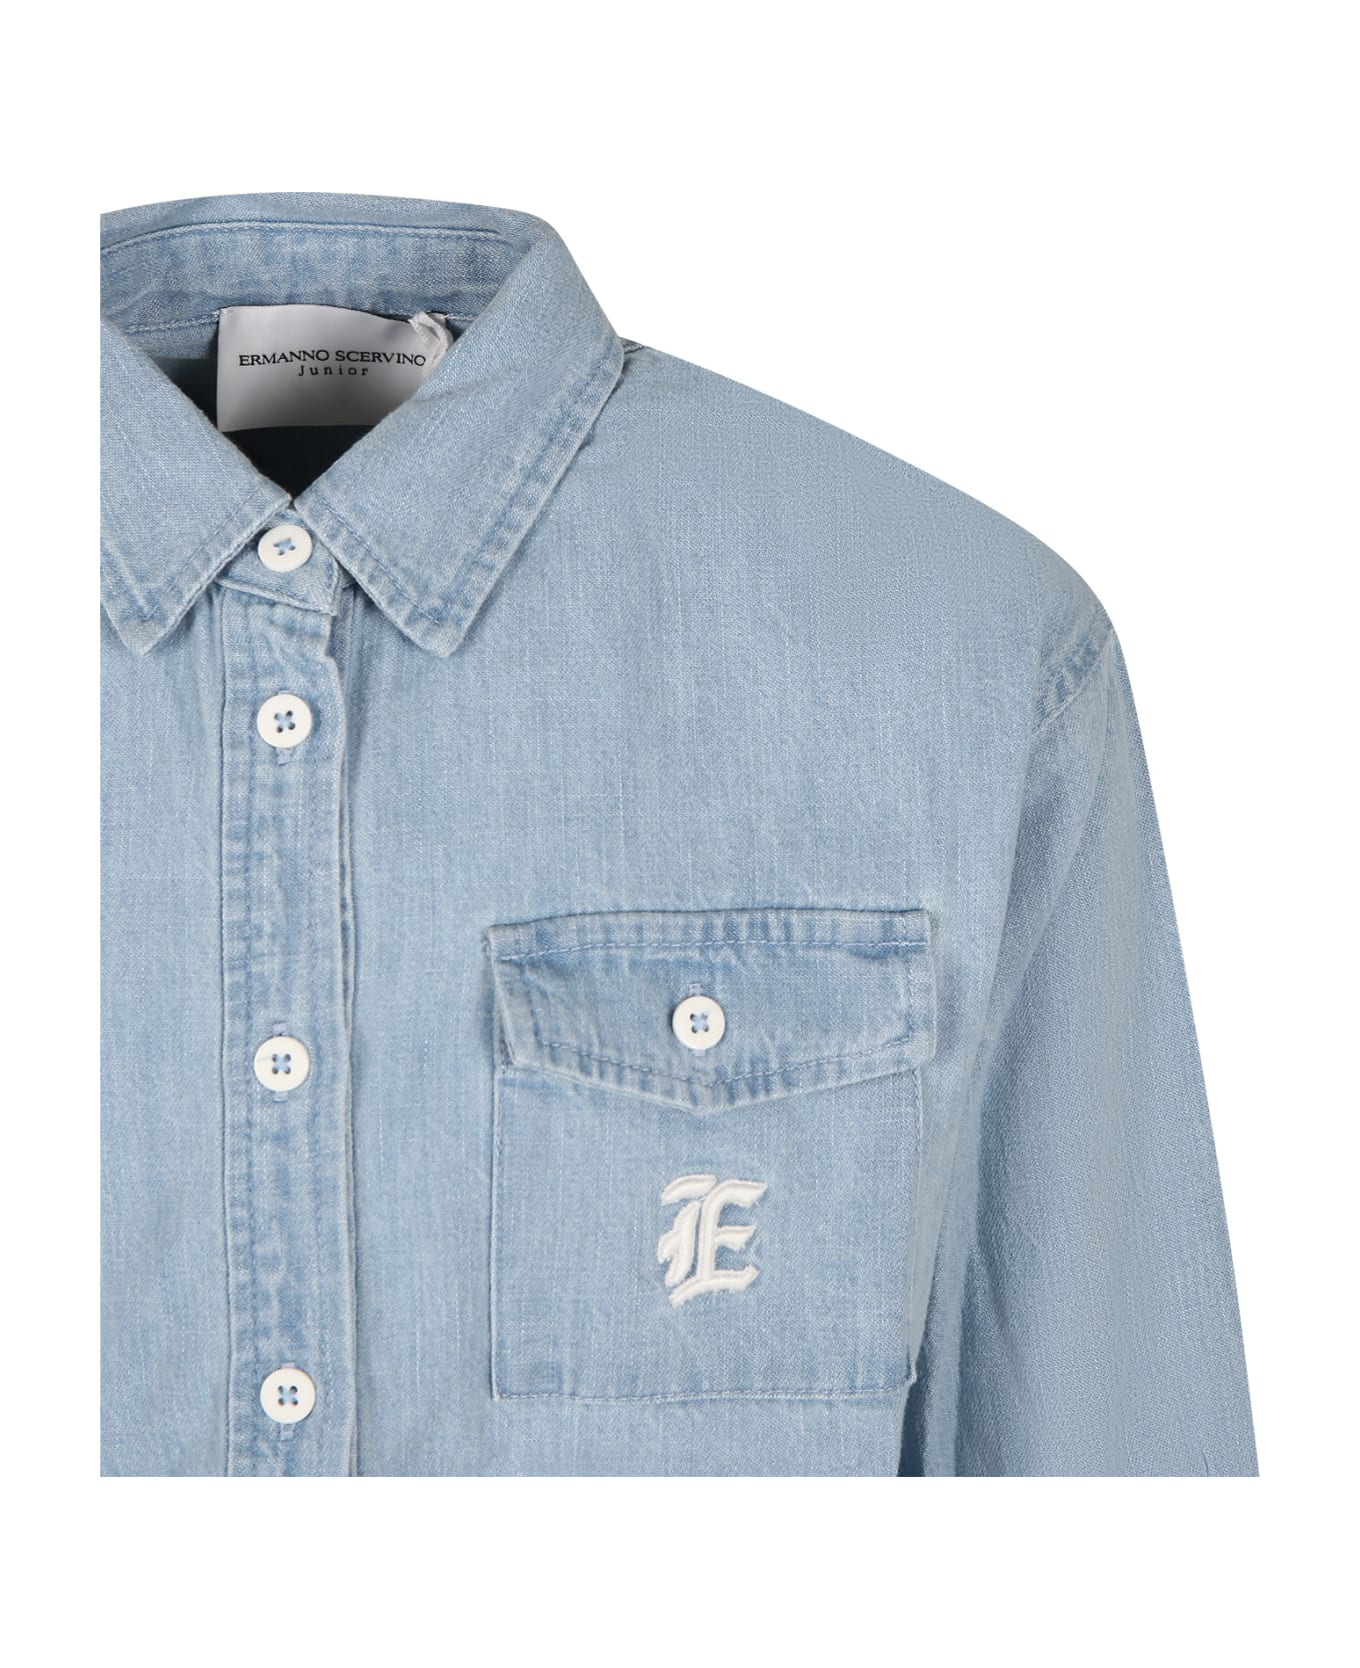 Ermanno Scervino Junior Blue Shirt For Girl With Embroidery And Logo - Denim